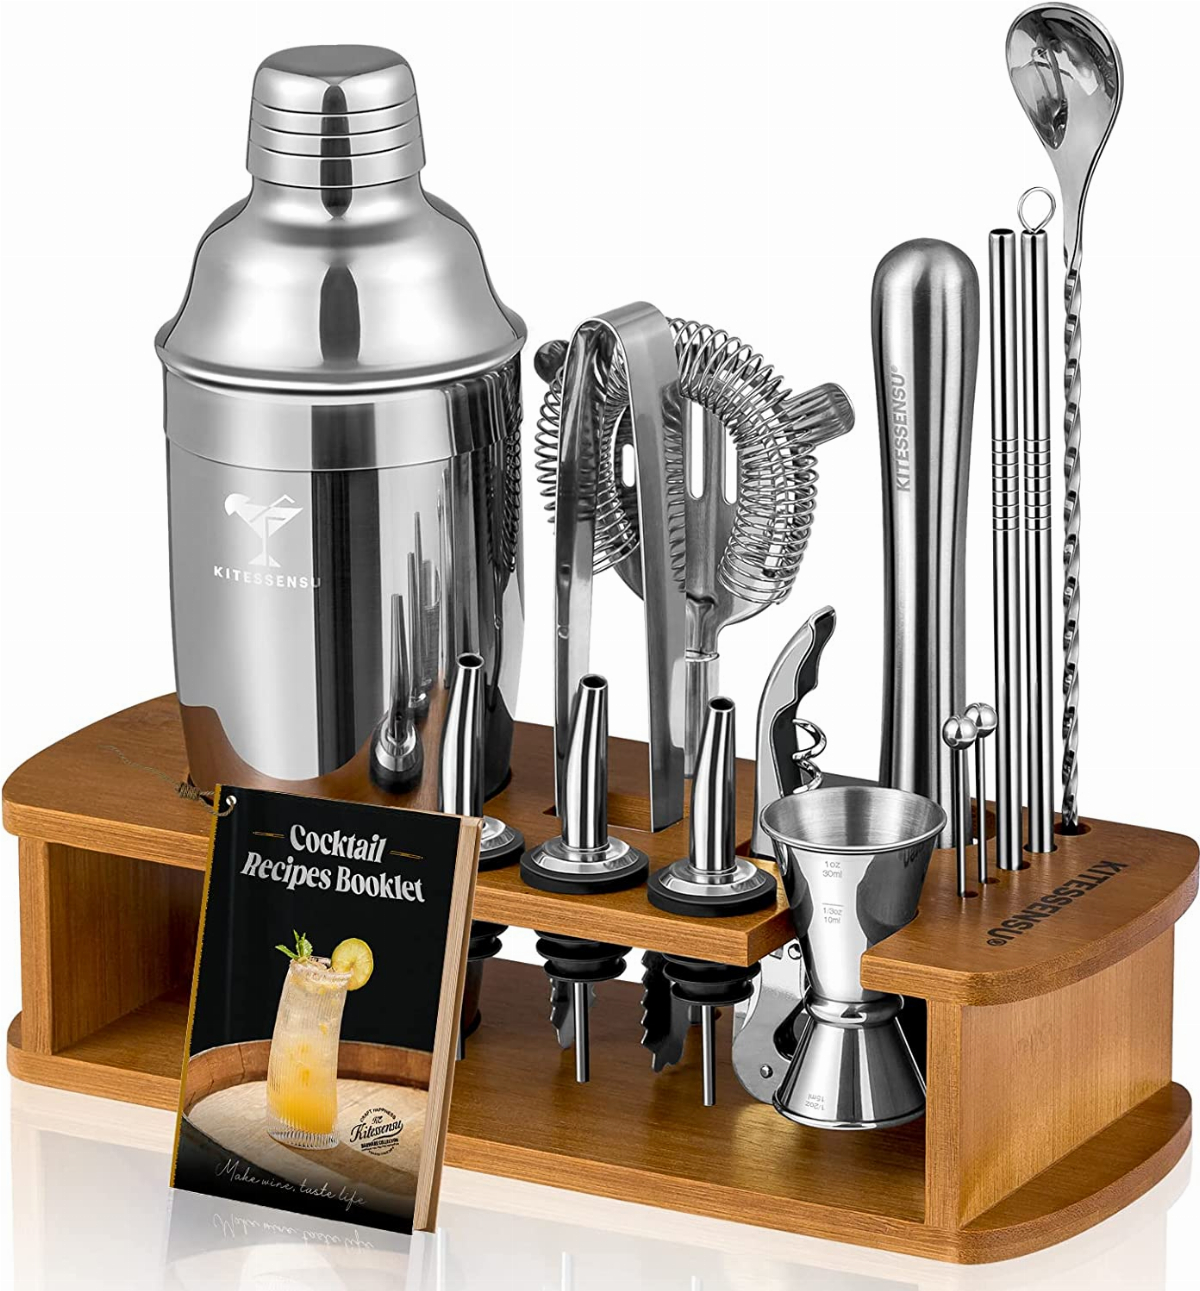 KITESSENSU Cocktail Shaker Set Bartender Kit with Stand Bar Kit Drink  Mixer Set with All Essential Bar Accessory Tools: Martini Shaker, Jigger,  Strainer, Mixer Spoon, Muddler, Liquor Pourers |Silver Silver Cobbler